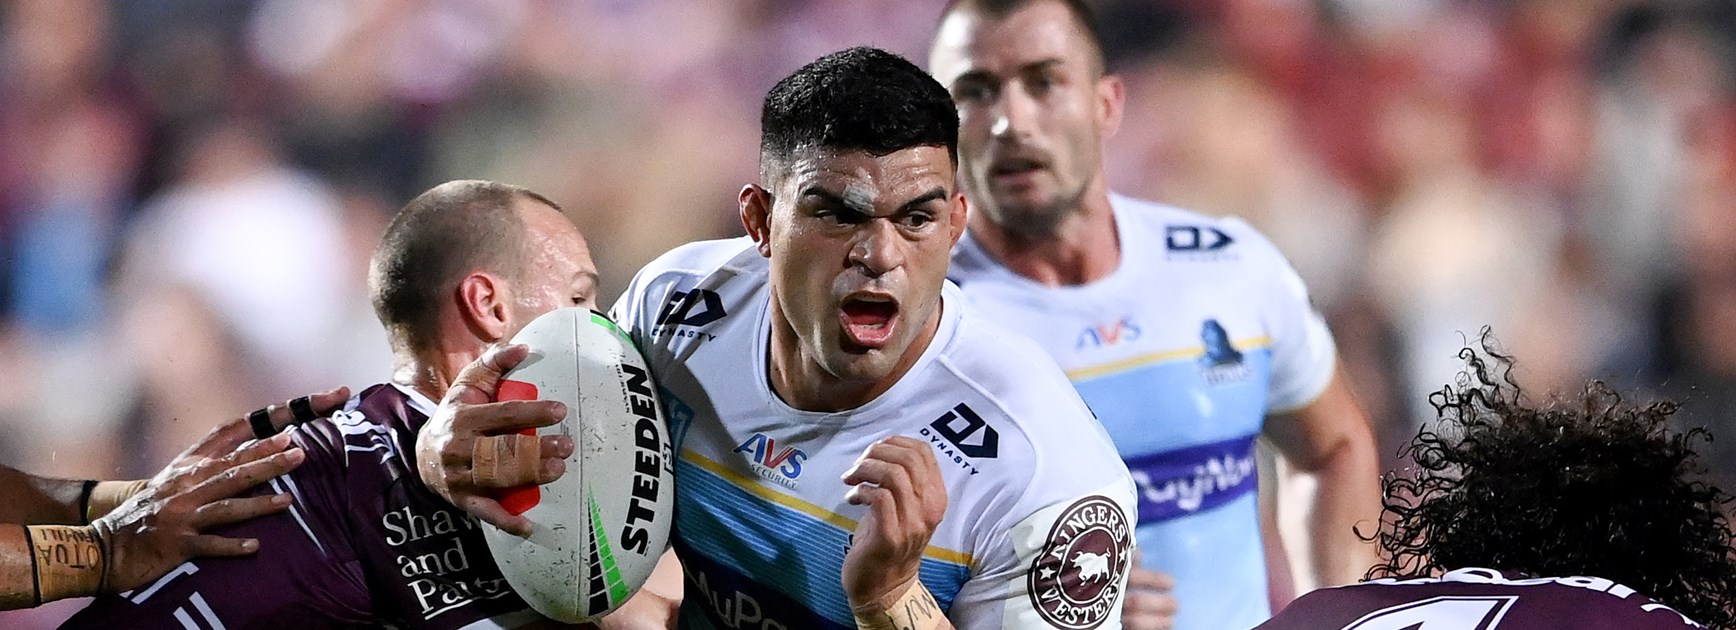 Fifita takes full Dally M points after Manly dominance